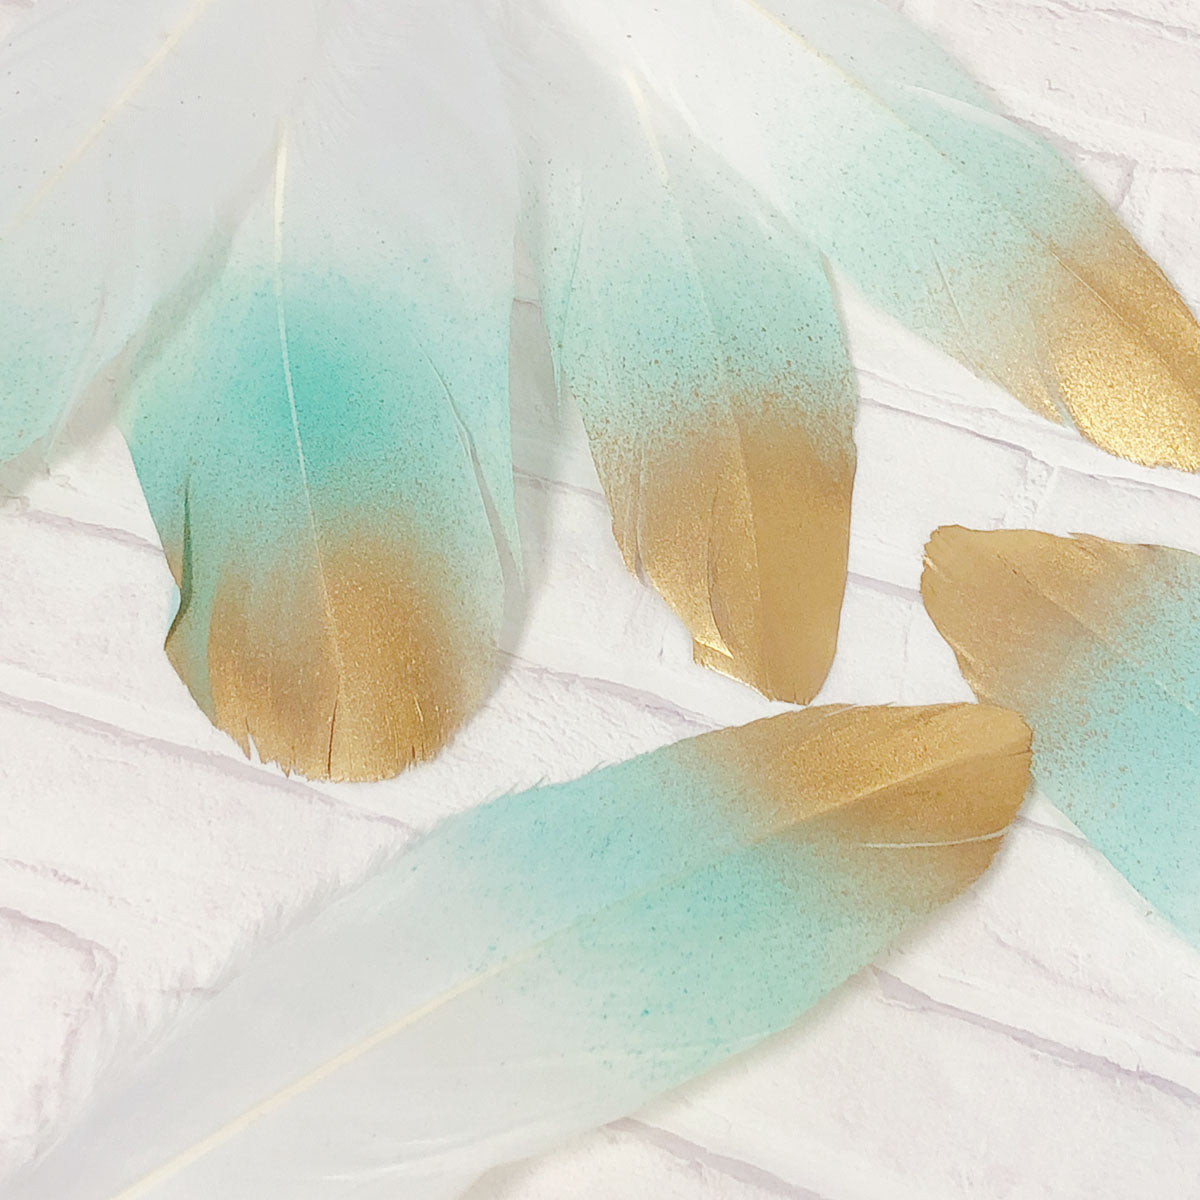 Wrapables Gold Dipped Feathers, Bohemian Decorations for Weddings, Parties, DIY Art Projects